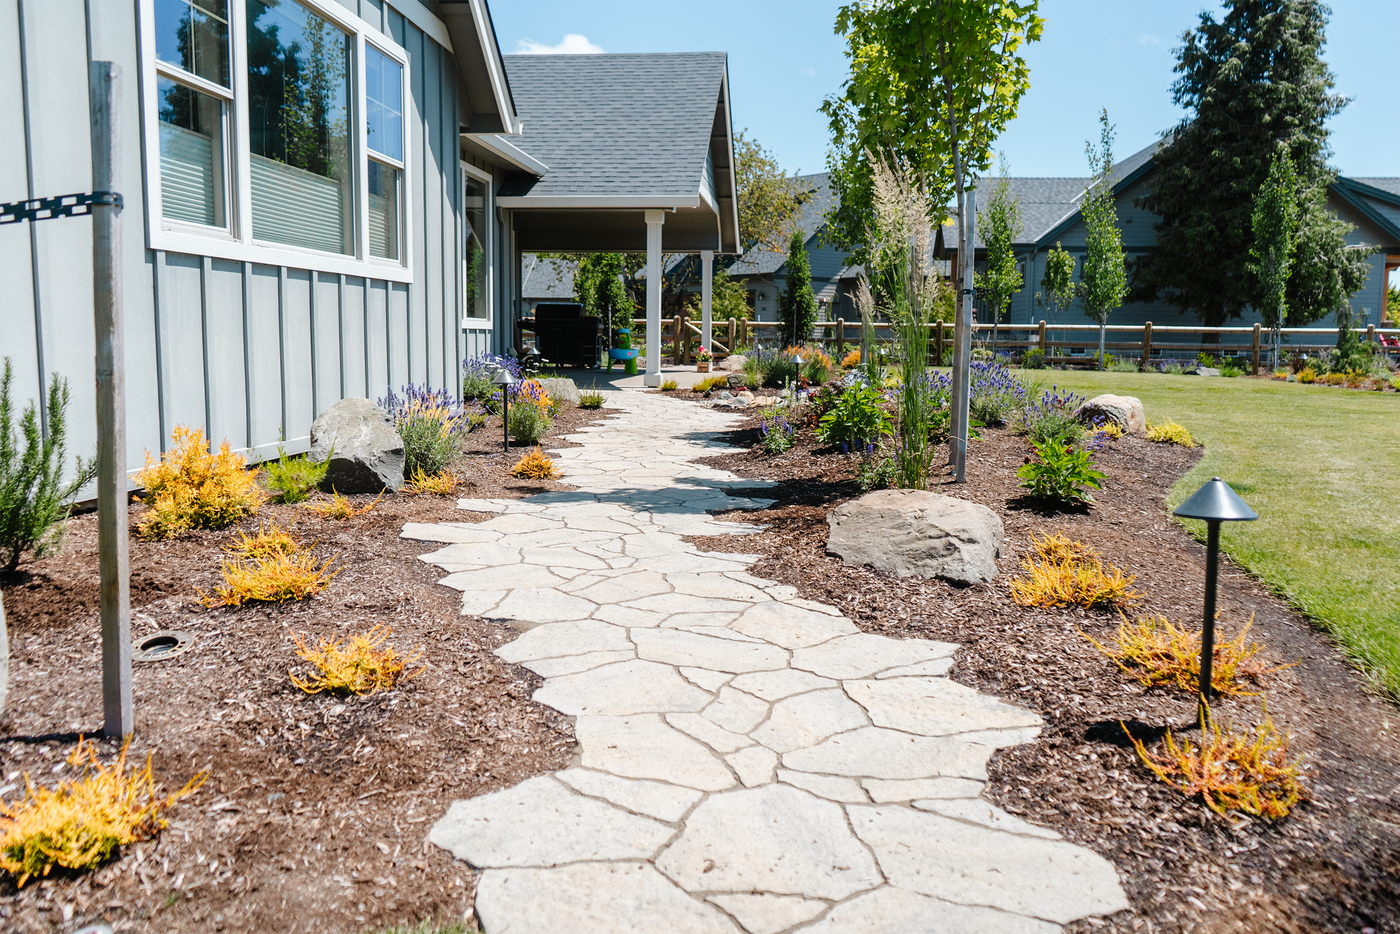 5 Essential Tips for Choosing the Right Pavers for Your Patio